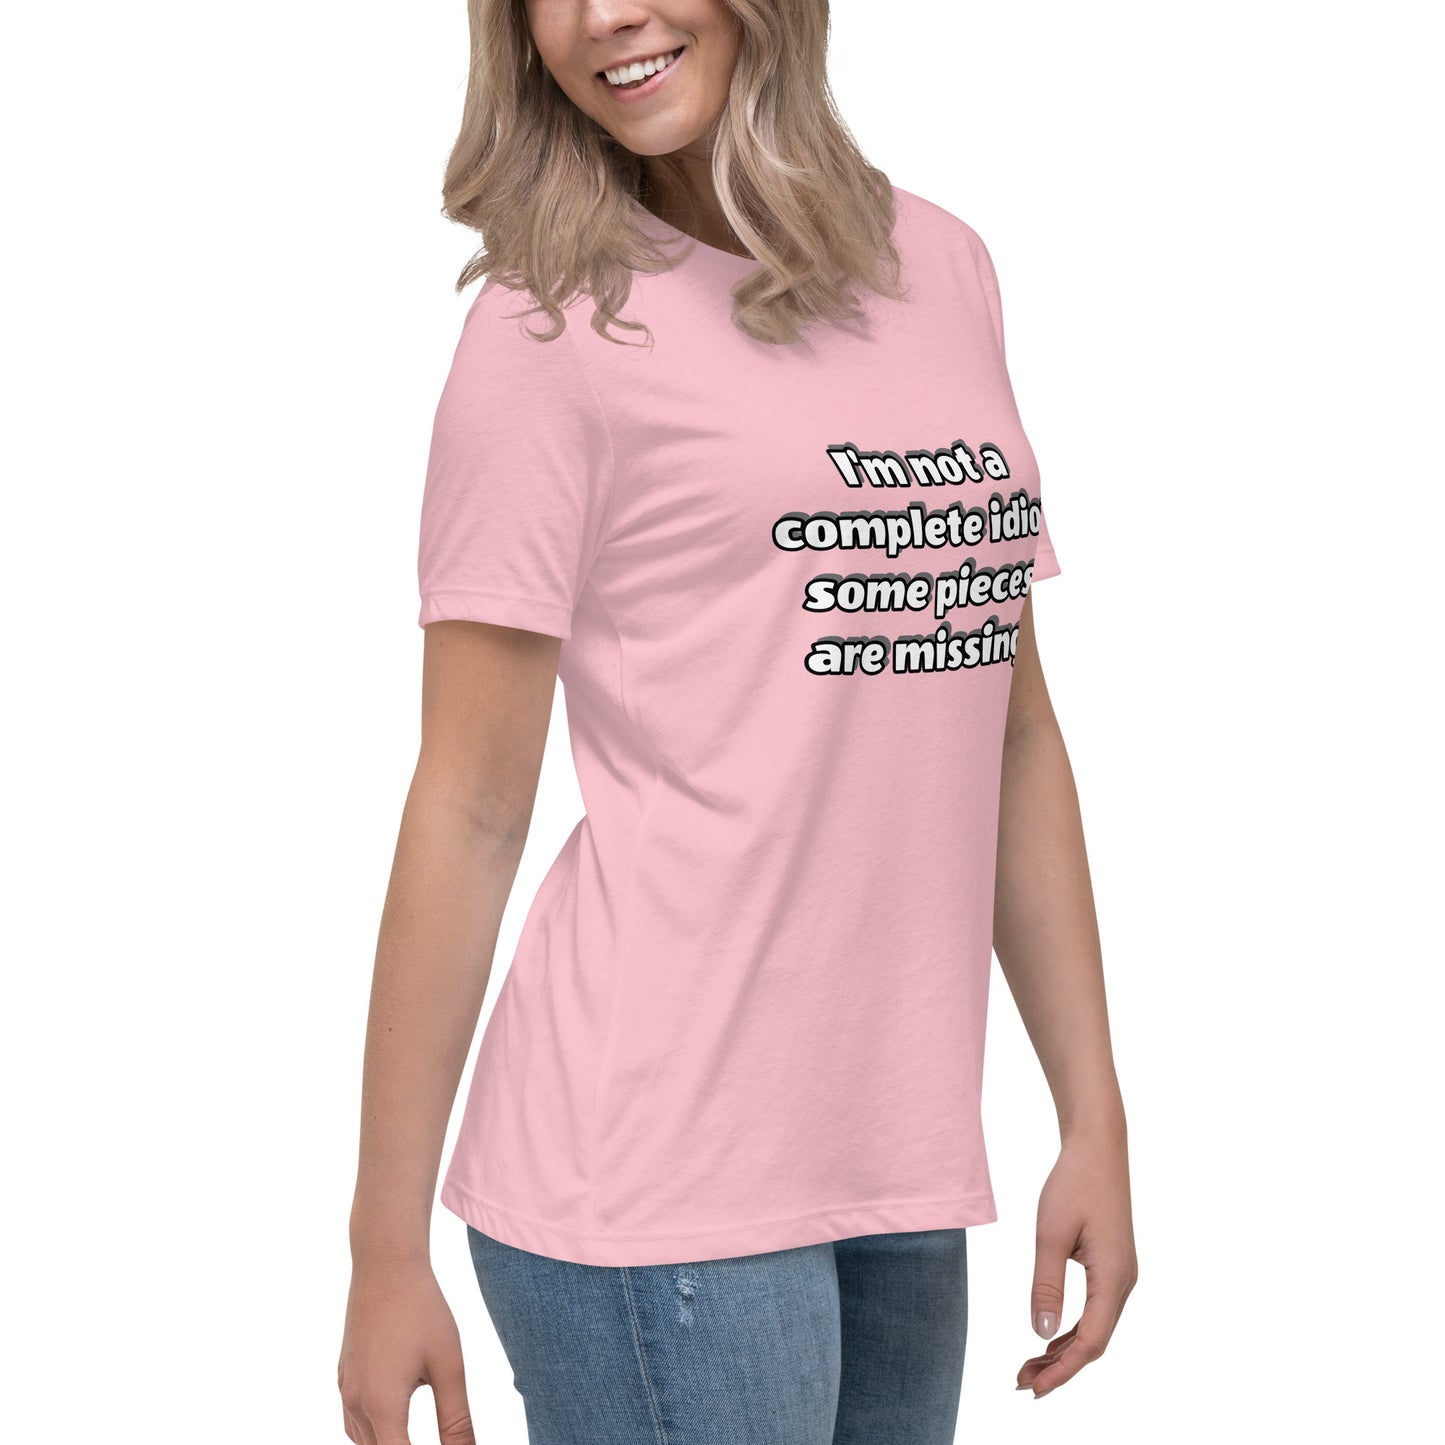 Women with pink t-shirt with text “I’m not a complete idiot, some pieces are missing”